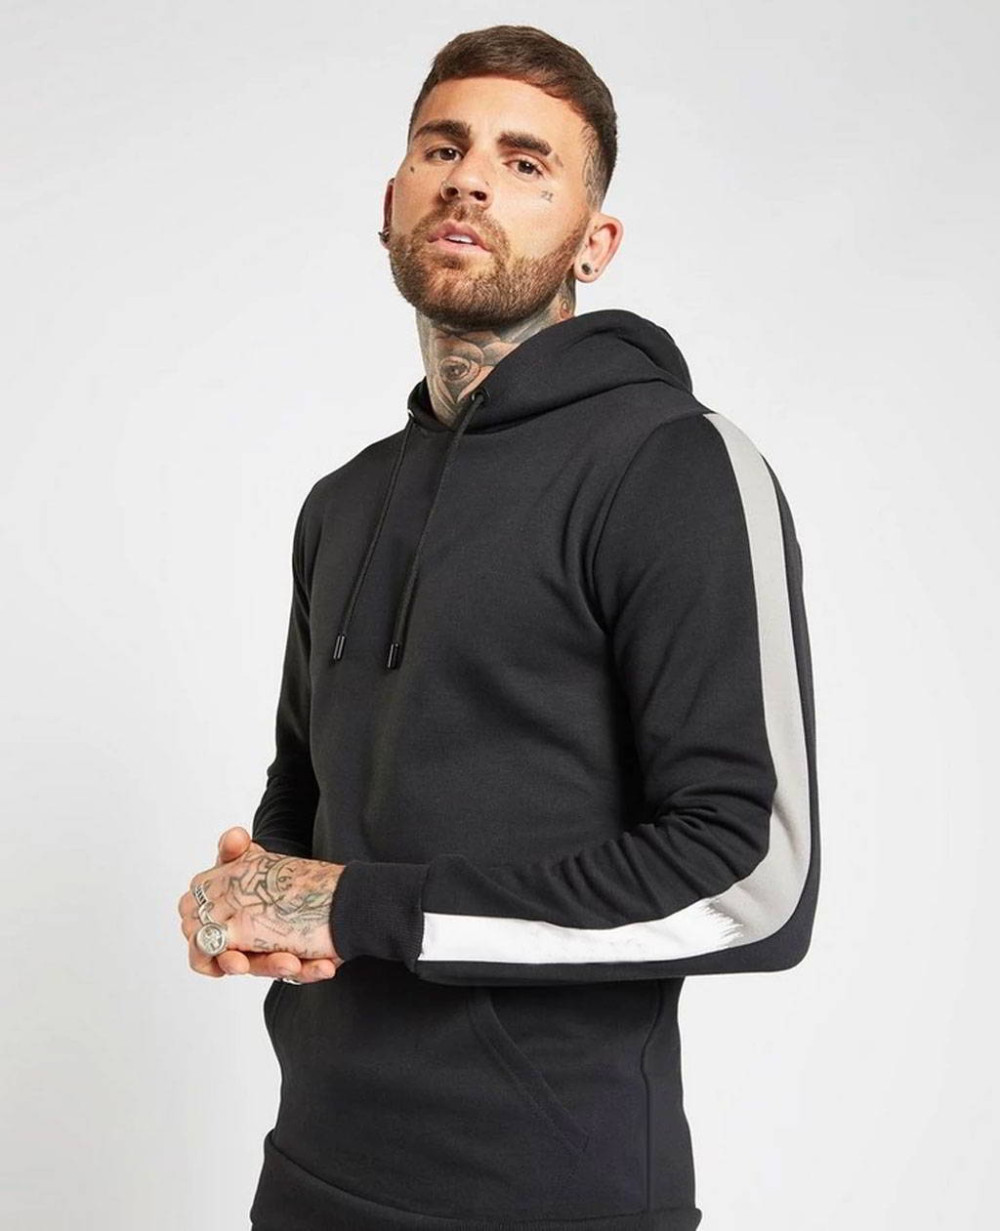 Men Hoodie Tracksuit Black With White Stripes